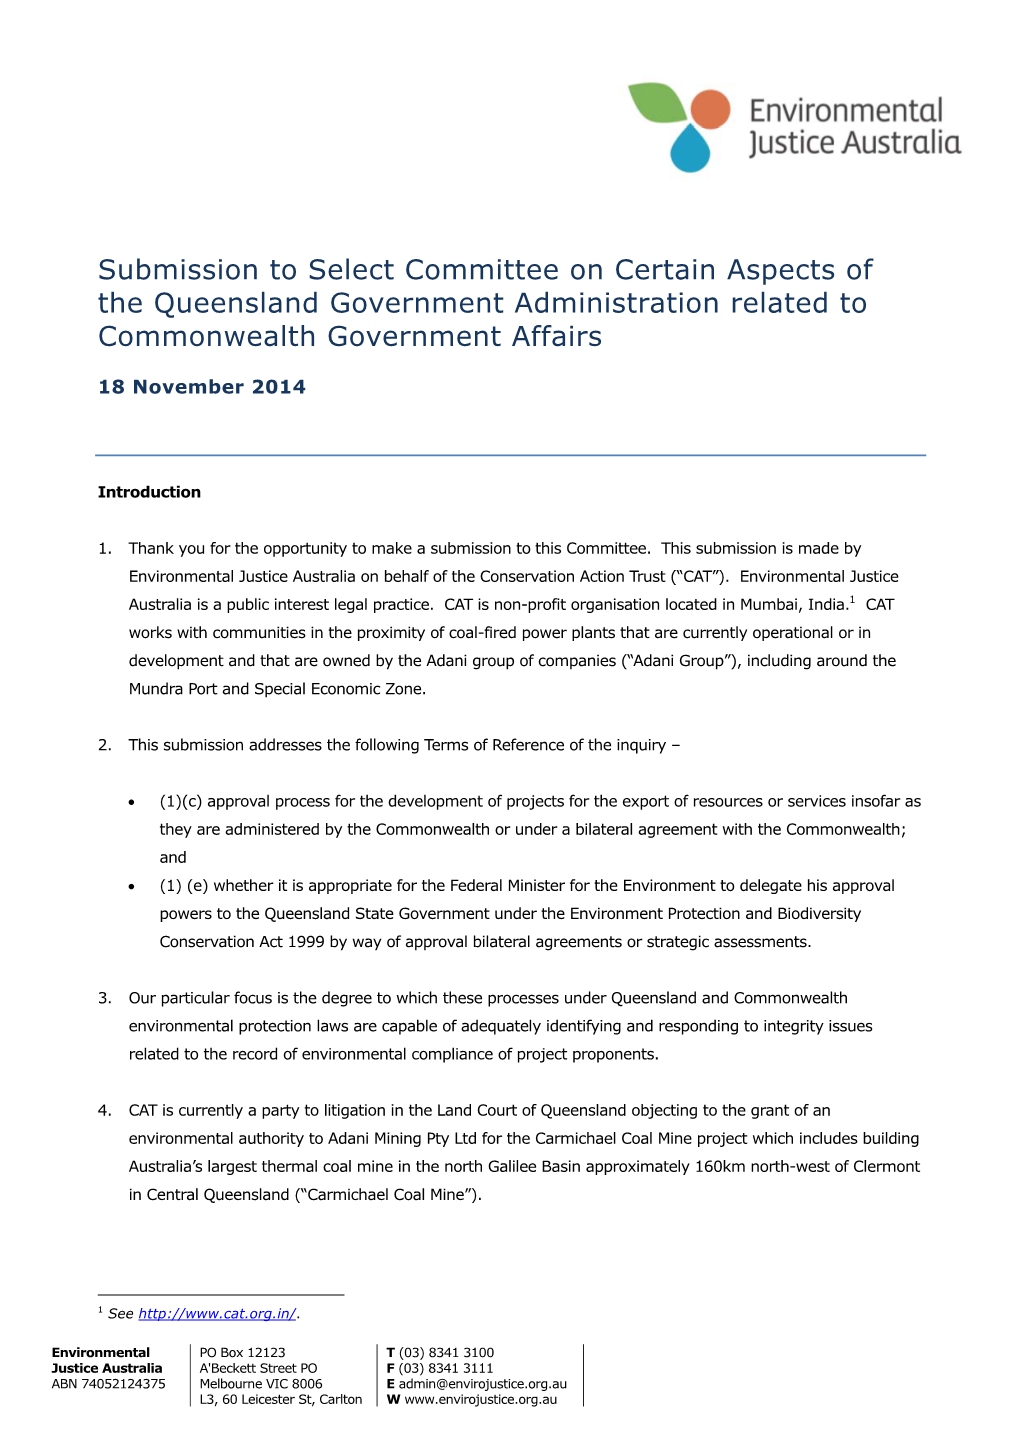 Submission to Select Committee on Certain Aspects of the Queensland Government Administration Related to Commonwealth Government Affairs